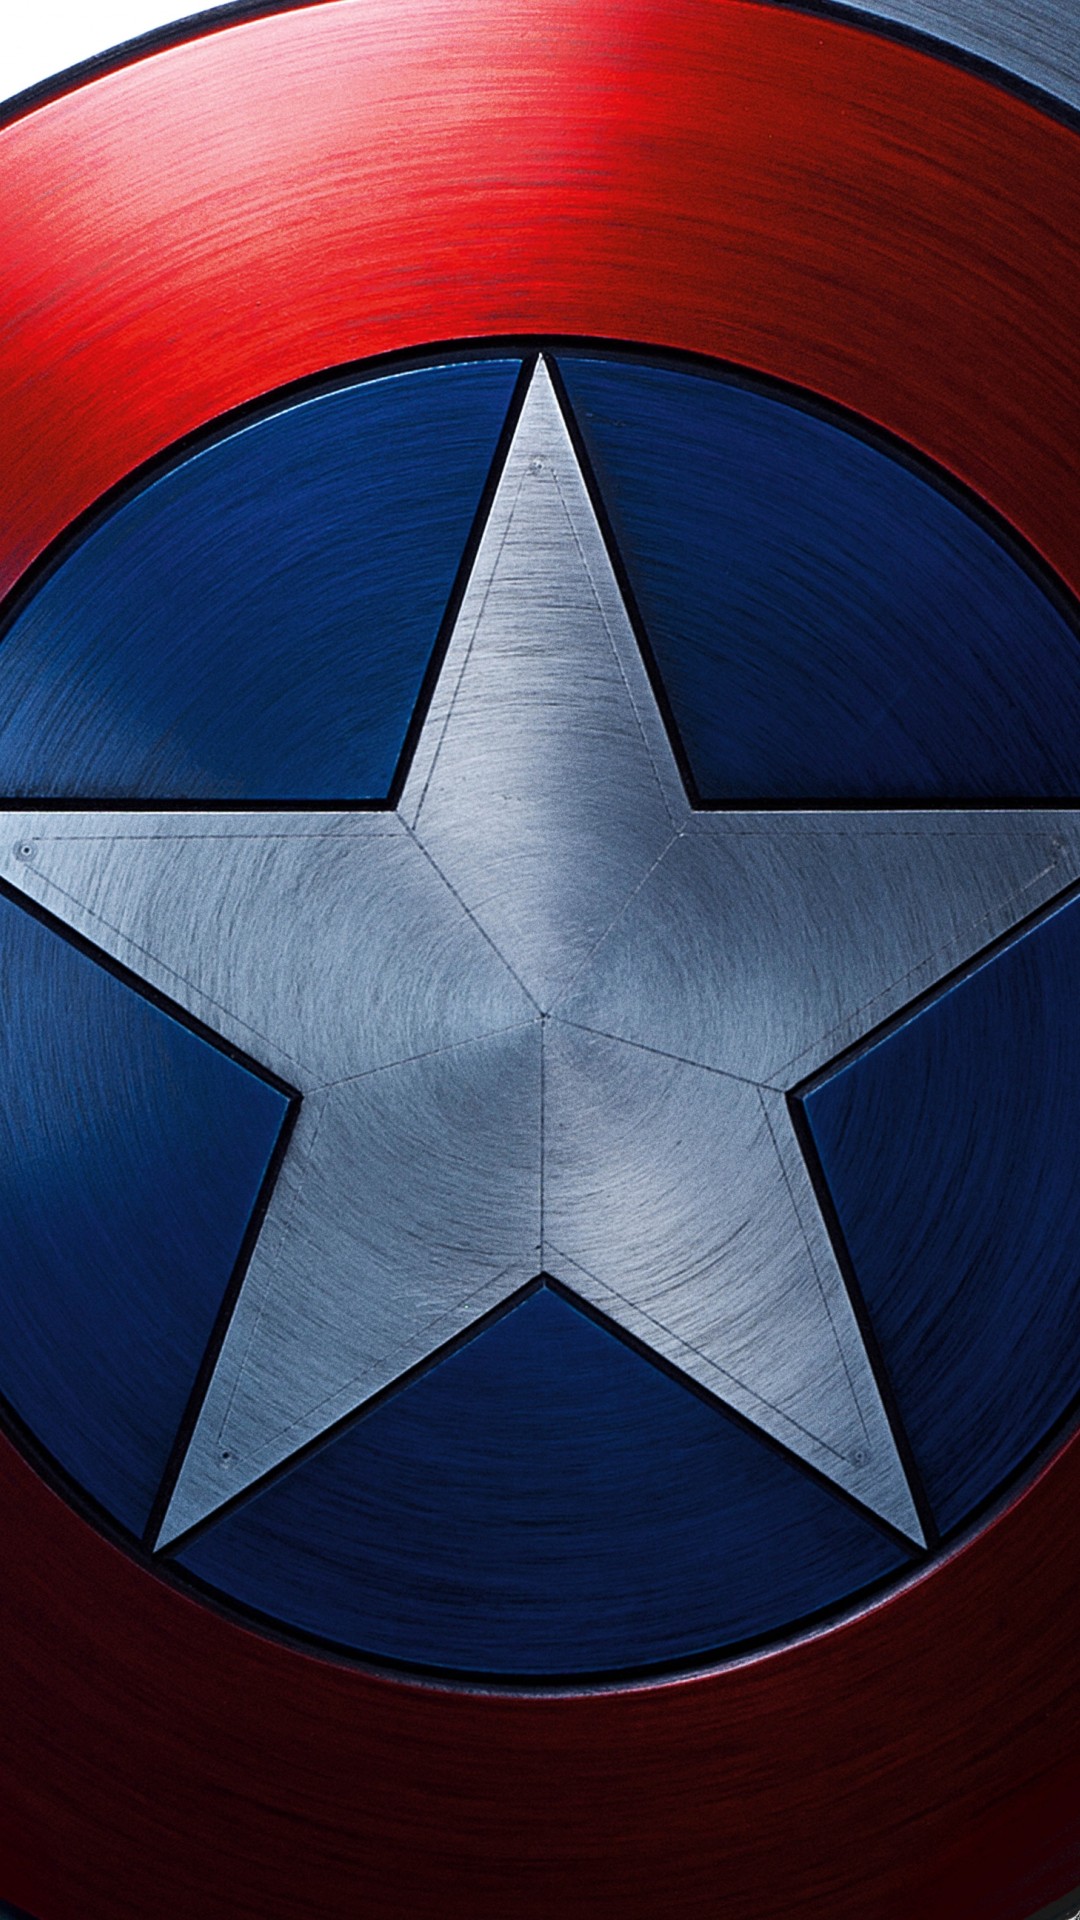 Marvel Wallpapers For Iphone Hd